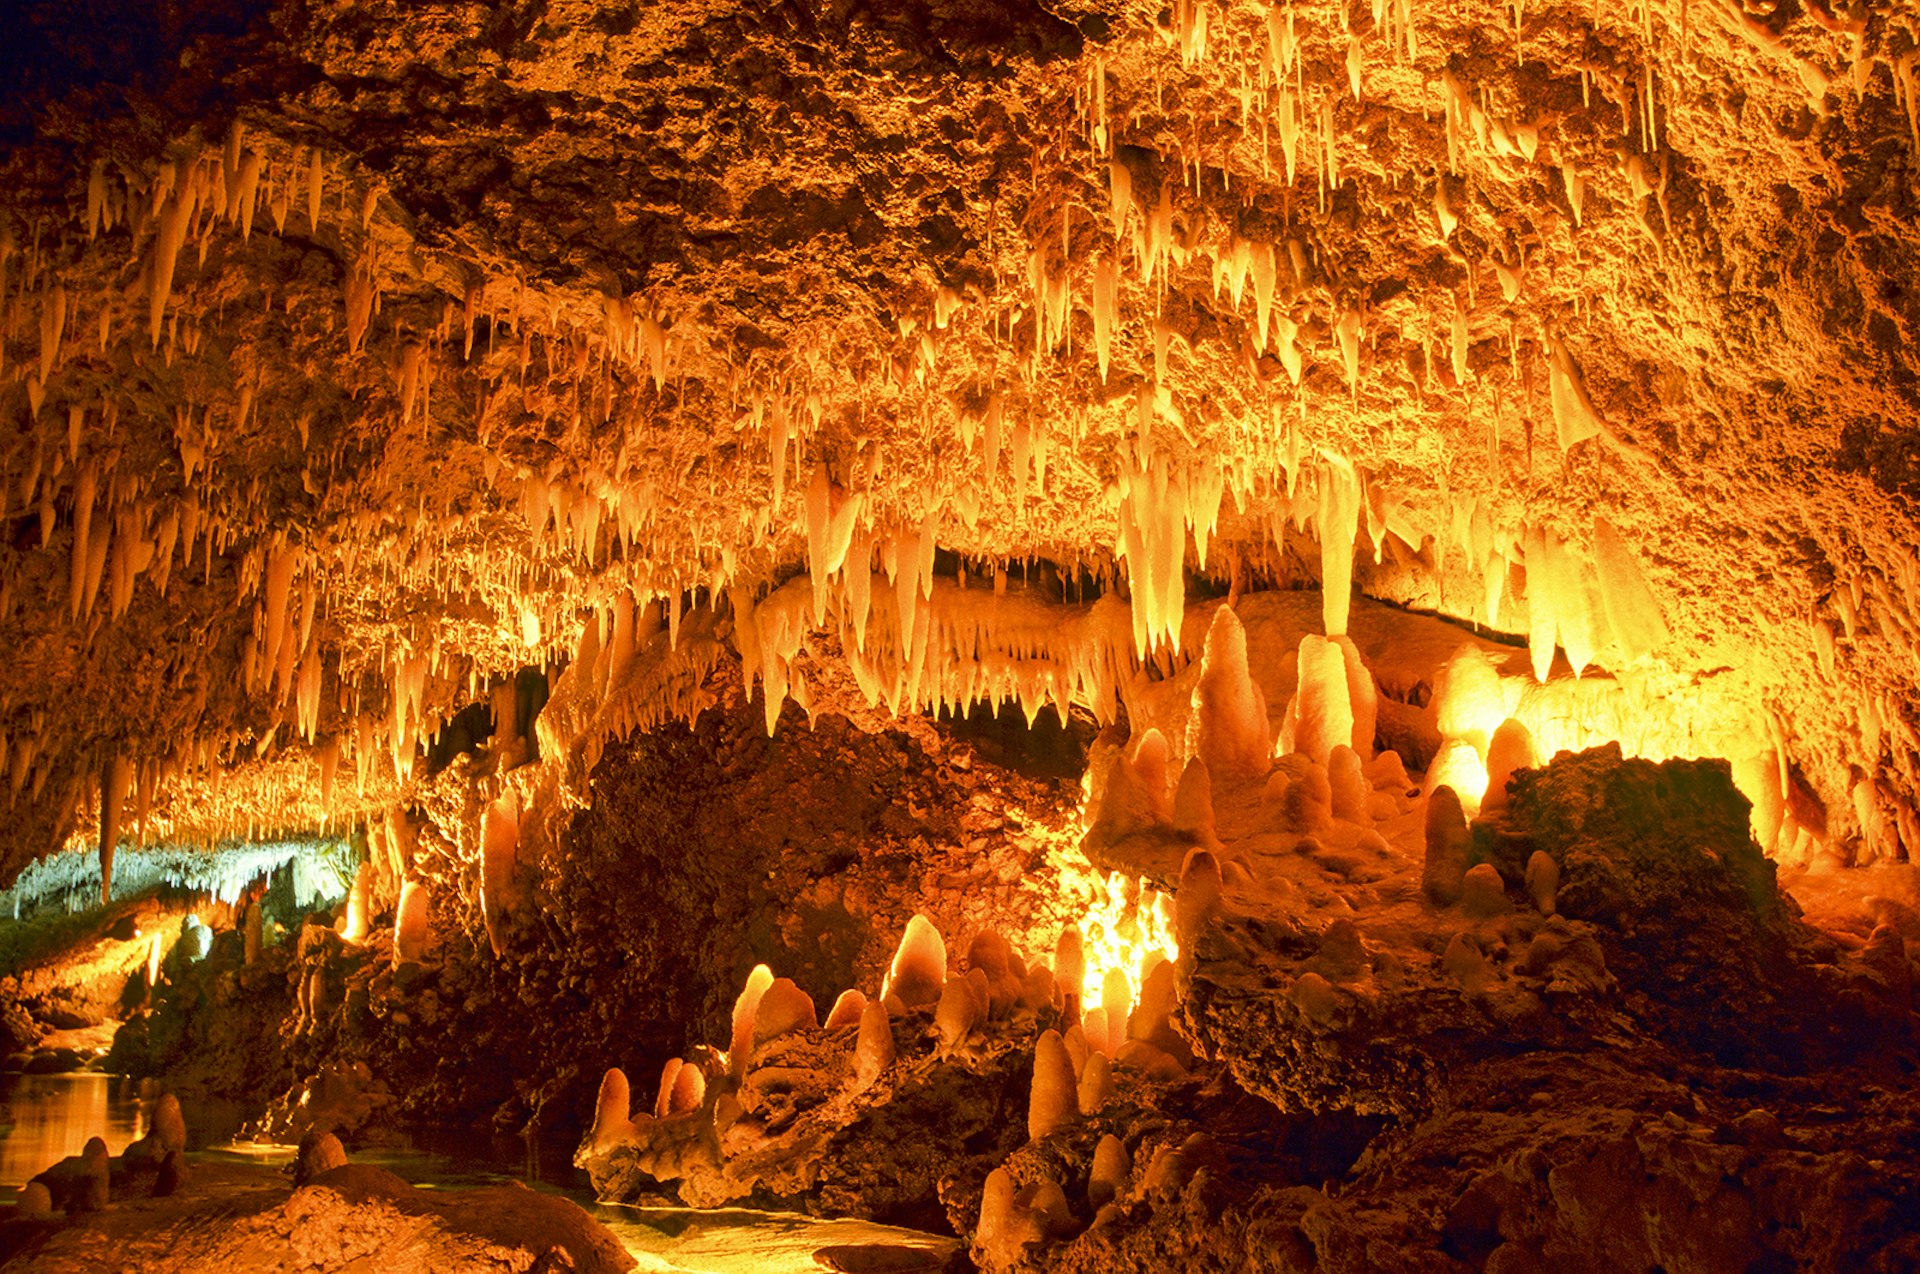 Features - Barbados, Harrison's Cave